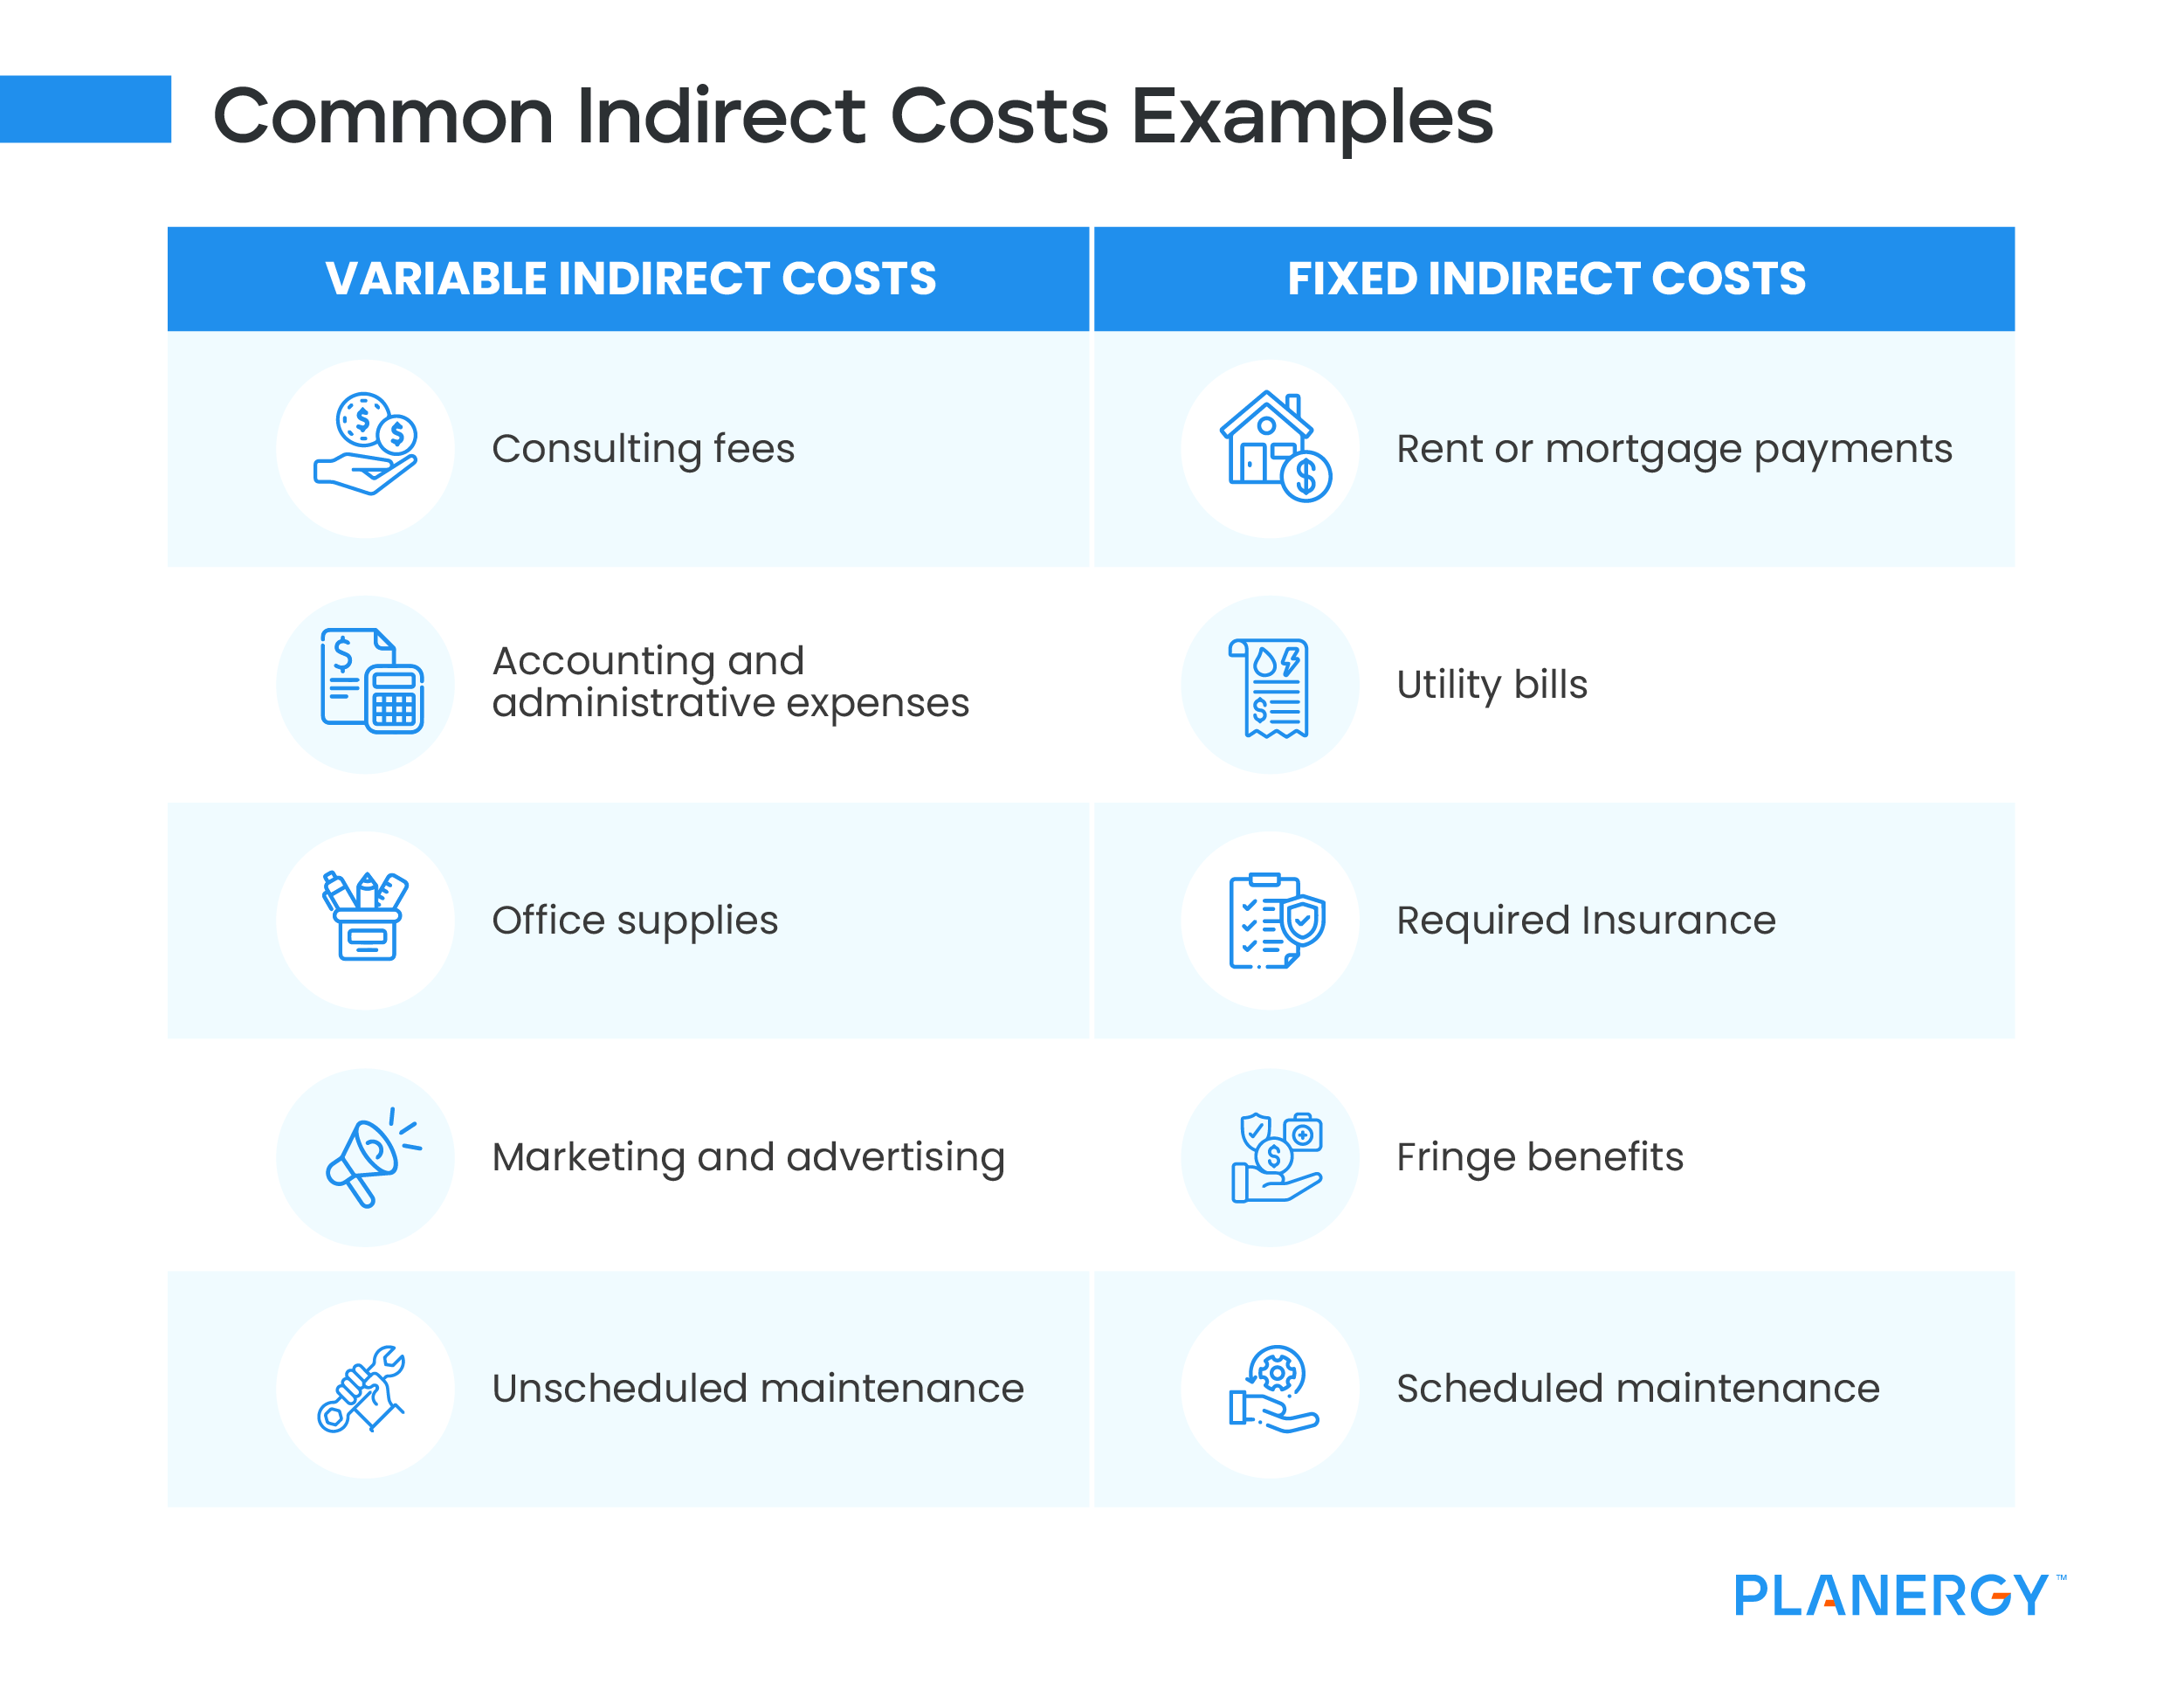 Common Indirect Cost Examples